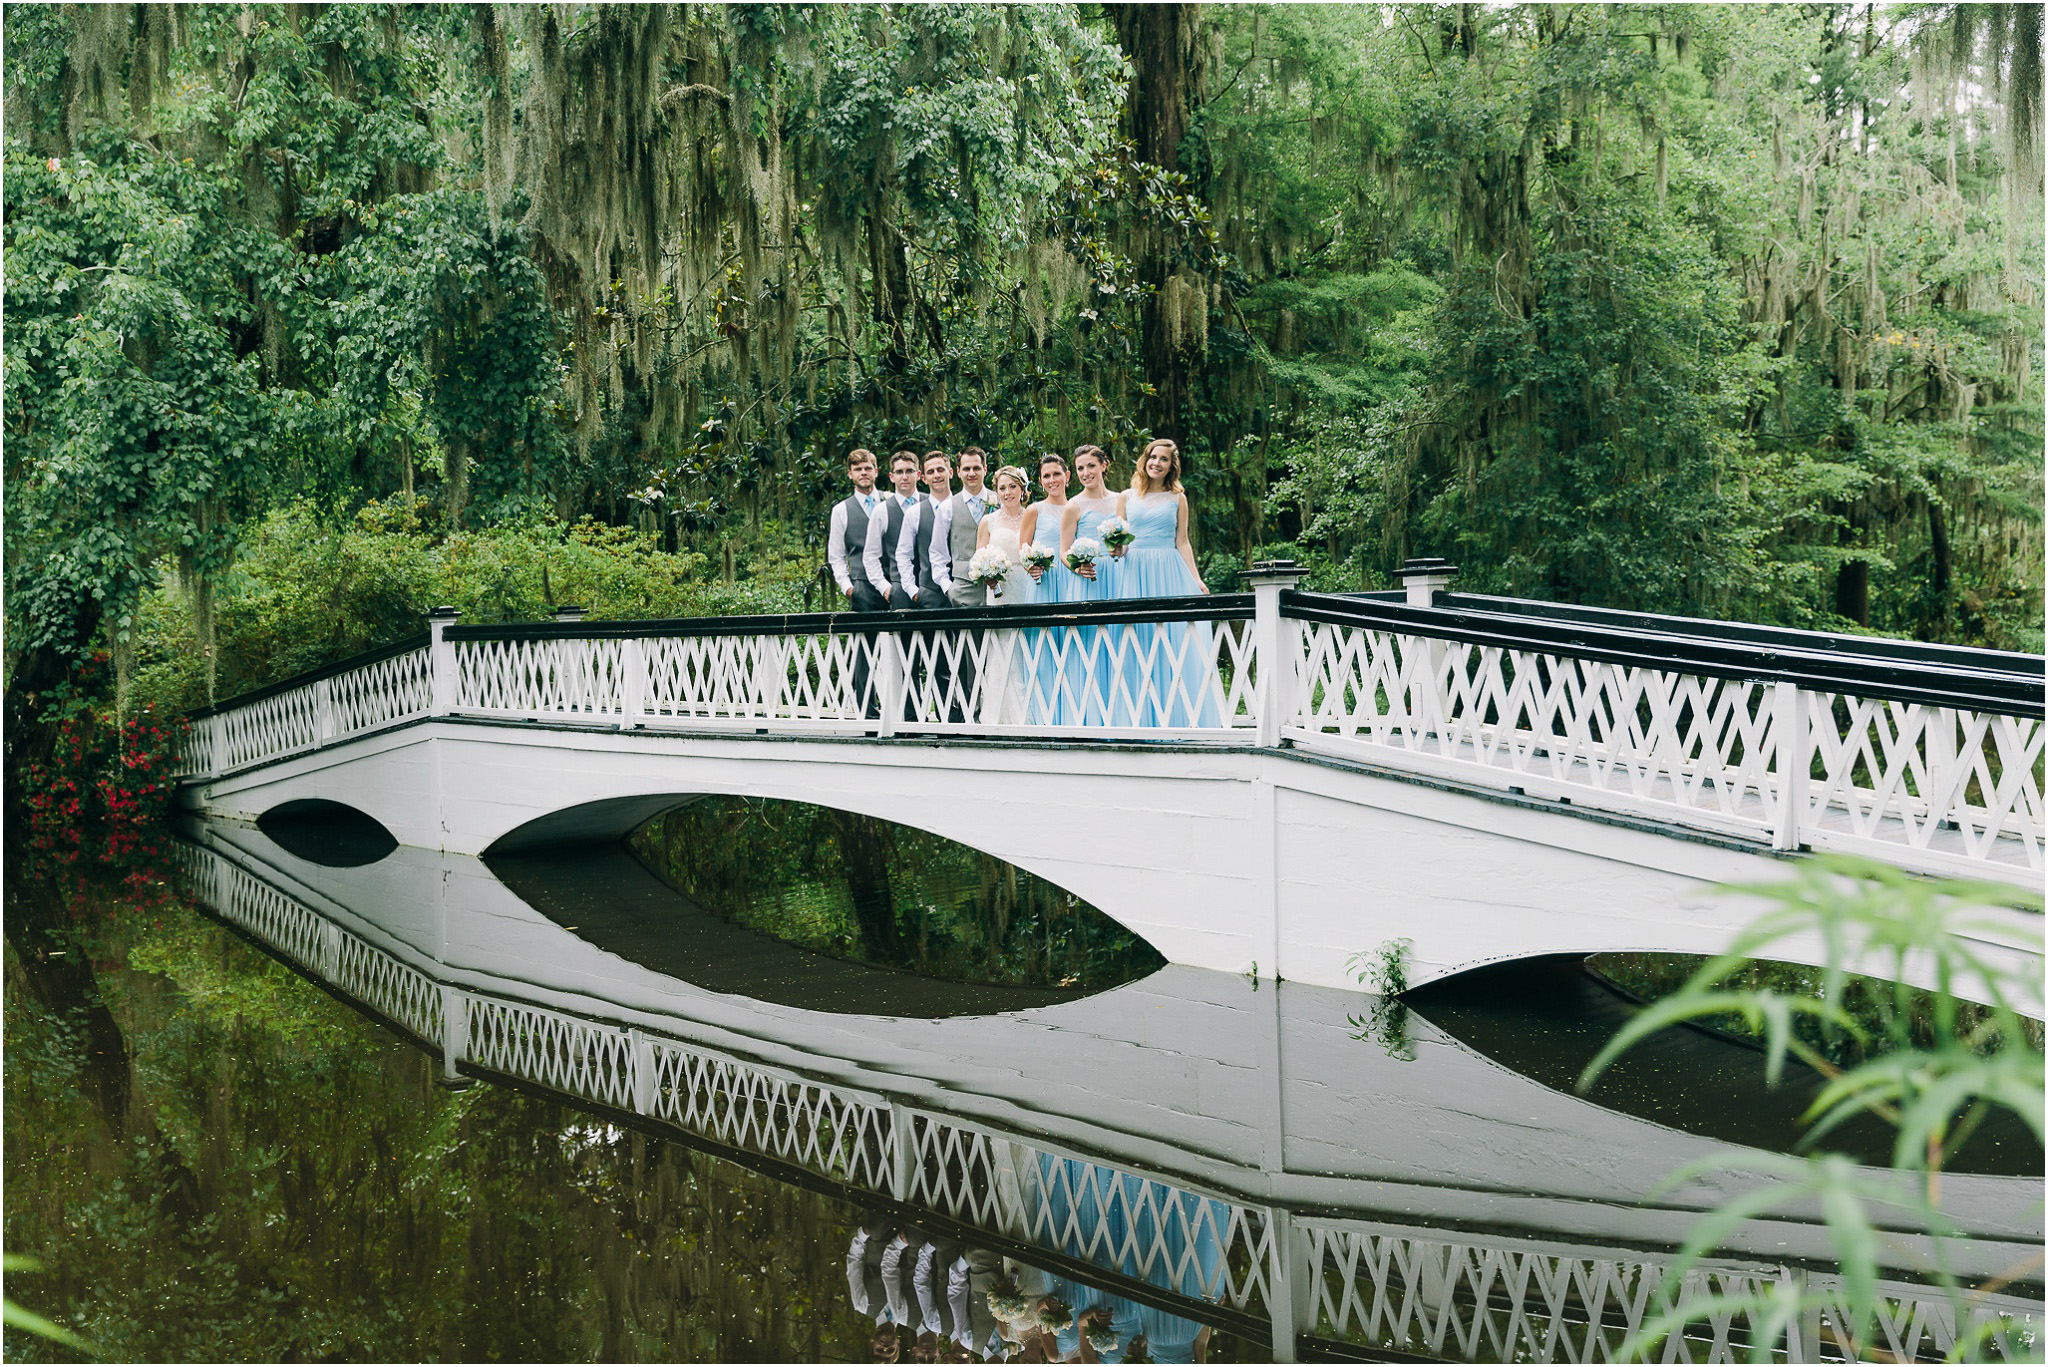 Breathtaking scenery in this shot with the wedding party Magnolia Plantation Wedding